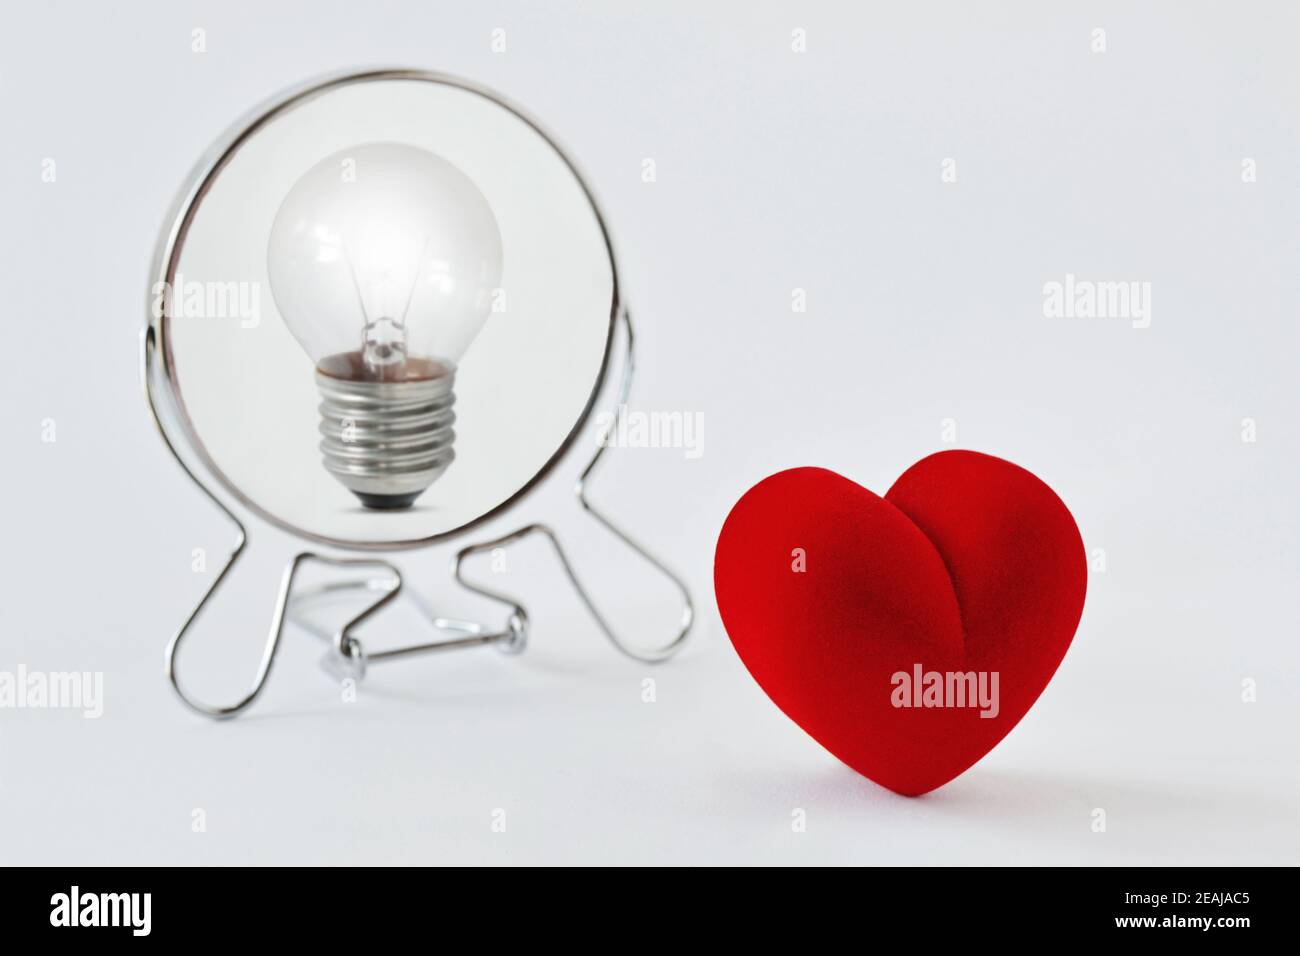 Heart looking in the mirror and seeing itself as a light bulb - Concept of dualism heart/mind, emotion/reason Stock Photo